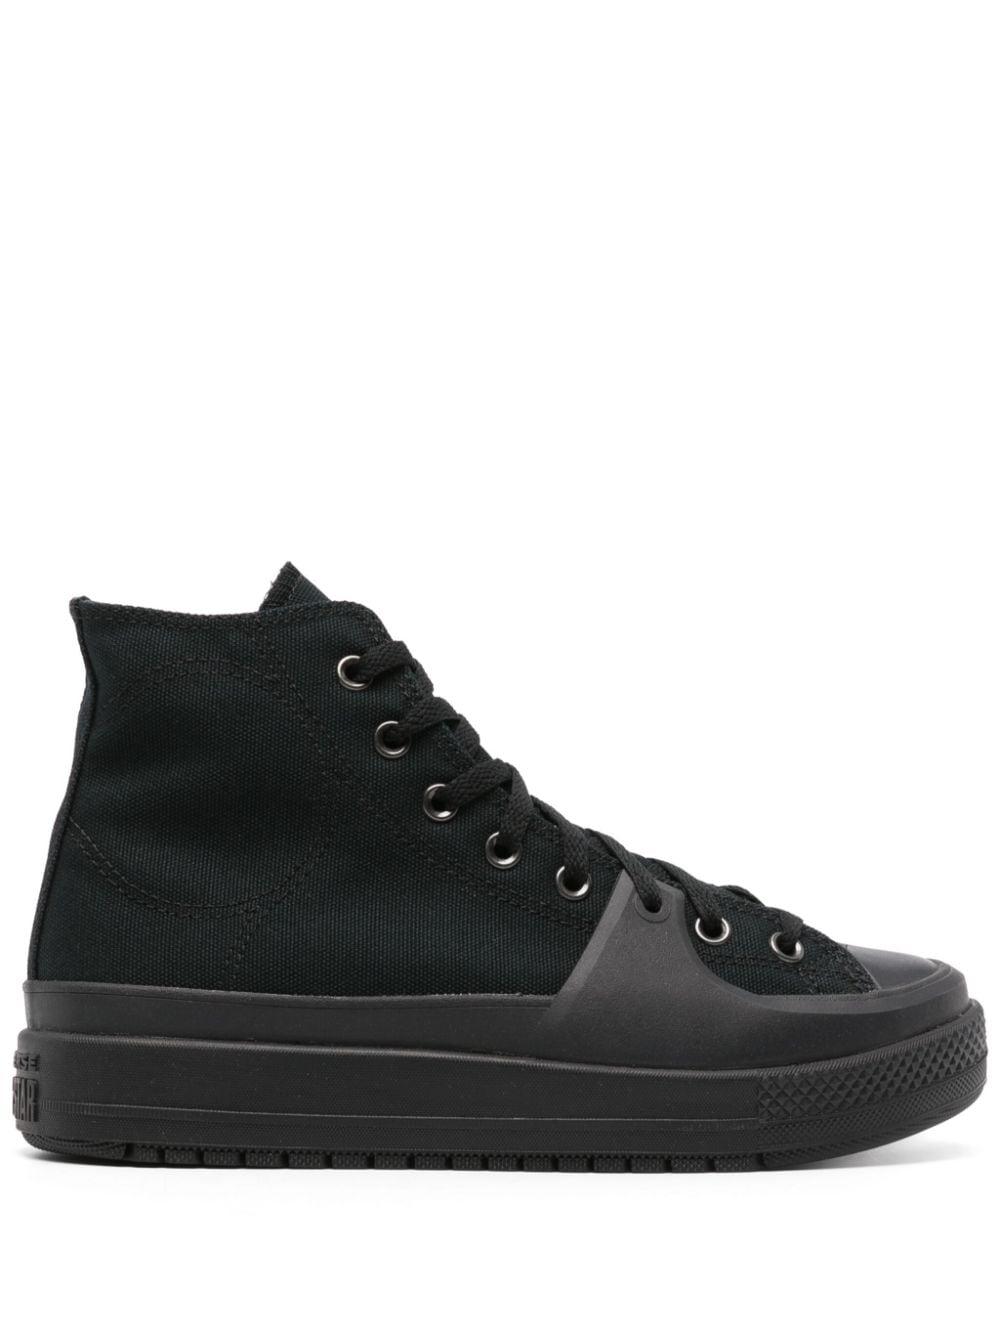 Converse Chuck Taylor All Stars Construct high-top sneakers - Black von Converse